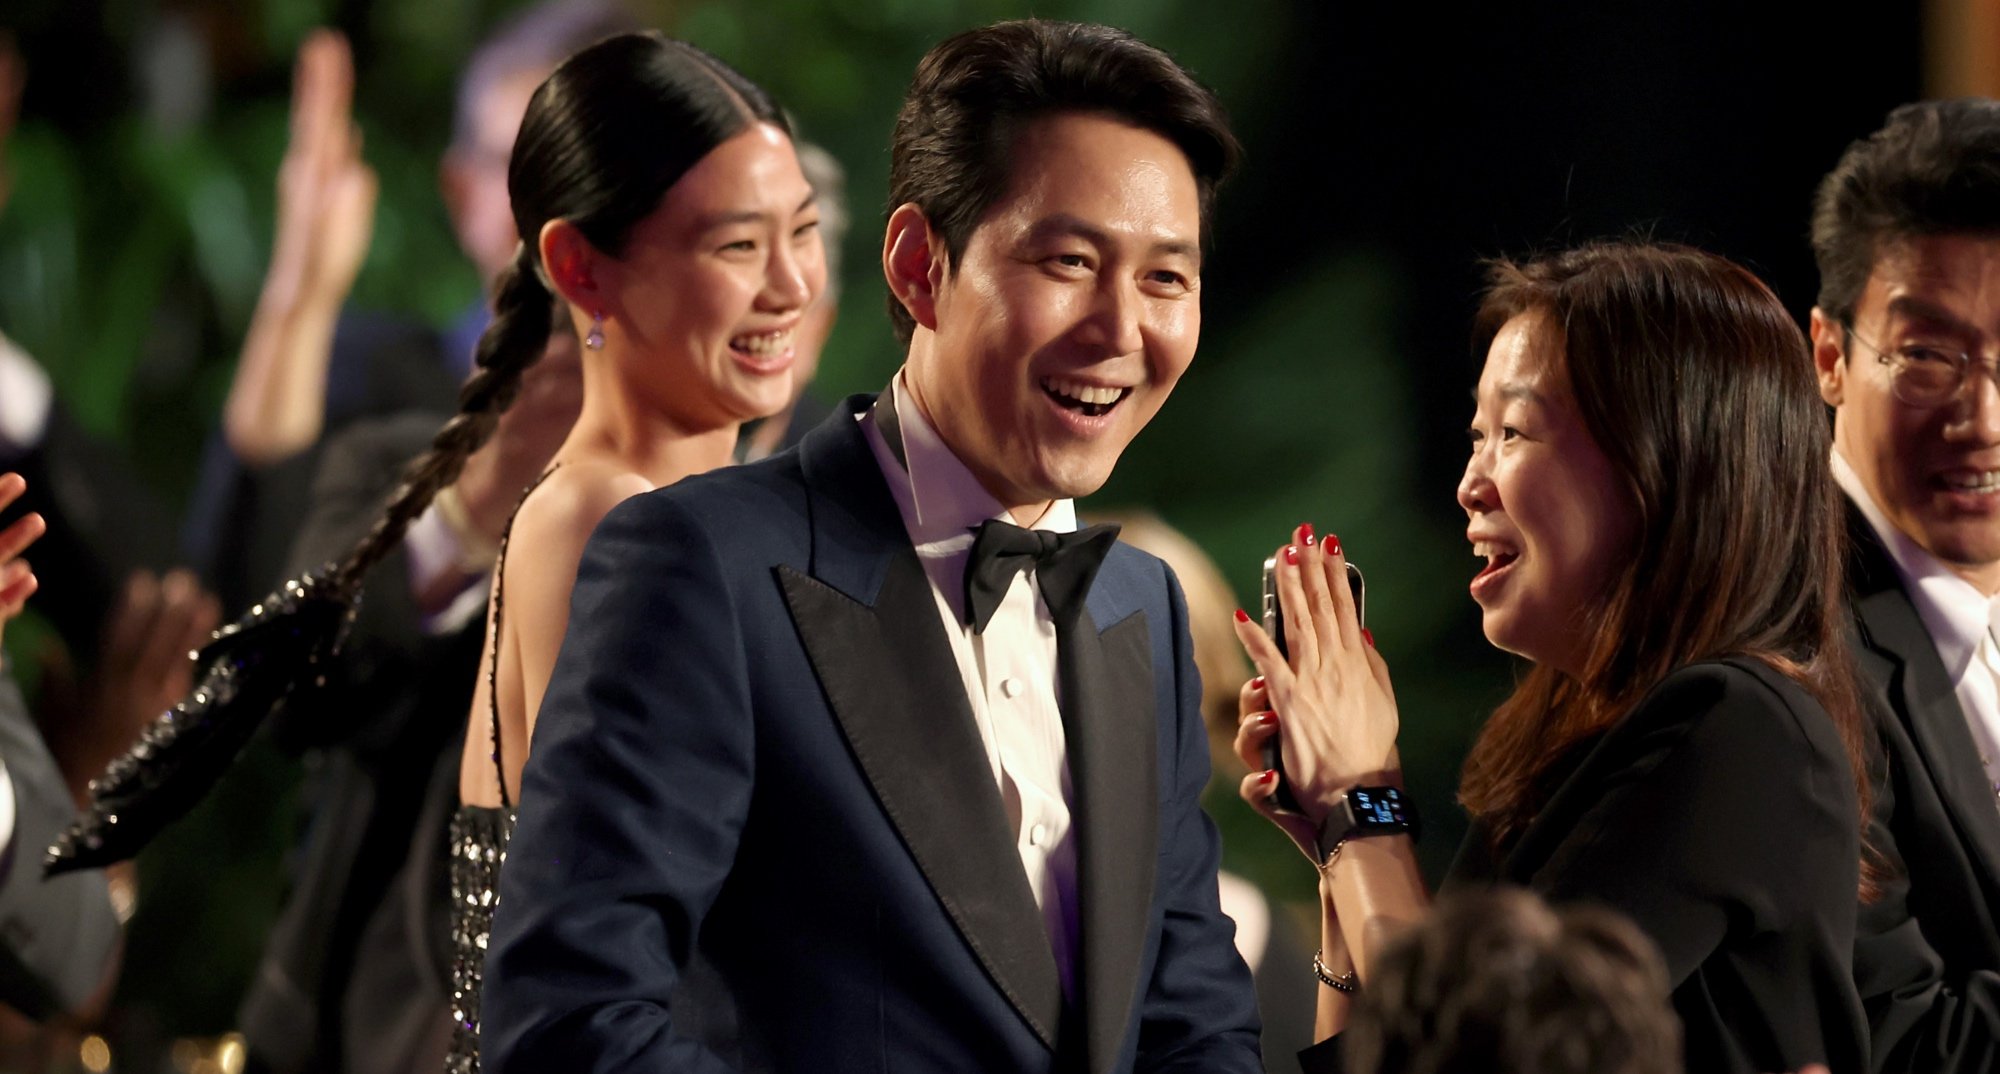 'Squid Game' actor Lee Jung-jae at SAG Awards surrounded by the cast.